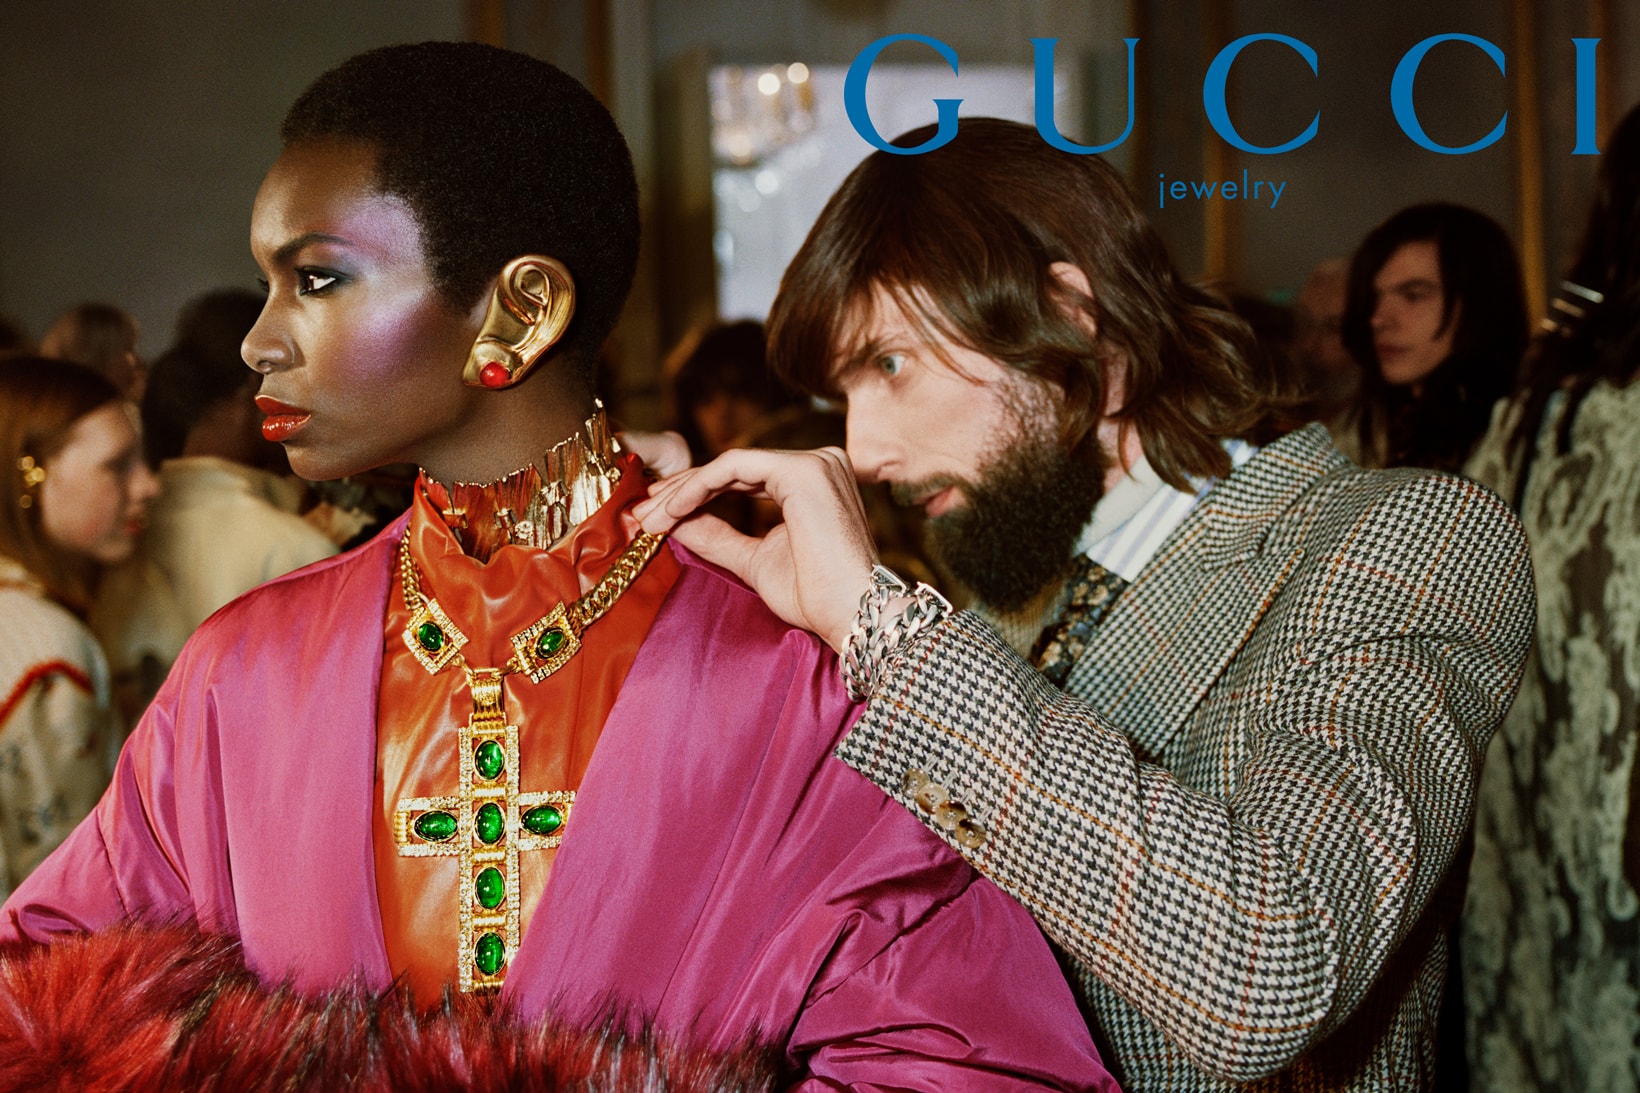 GucciPretAPorter Fall Winter 2019 Campaign Necklace Earrings Gold Jacket Pink